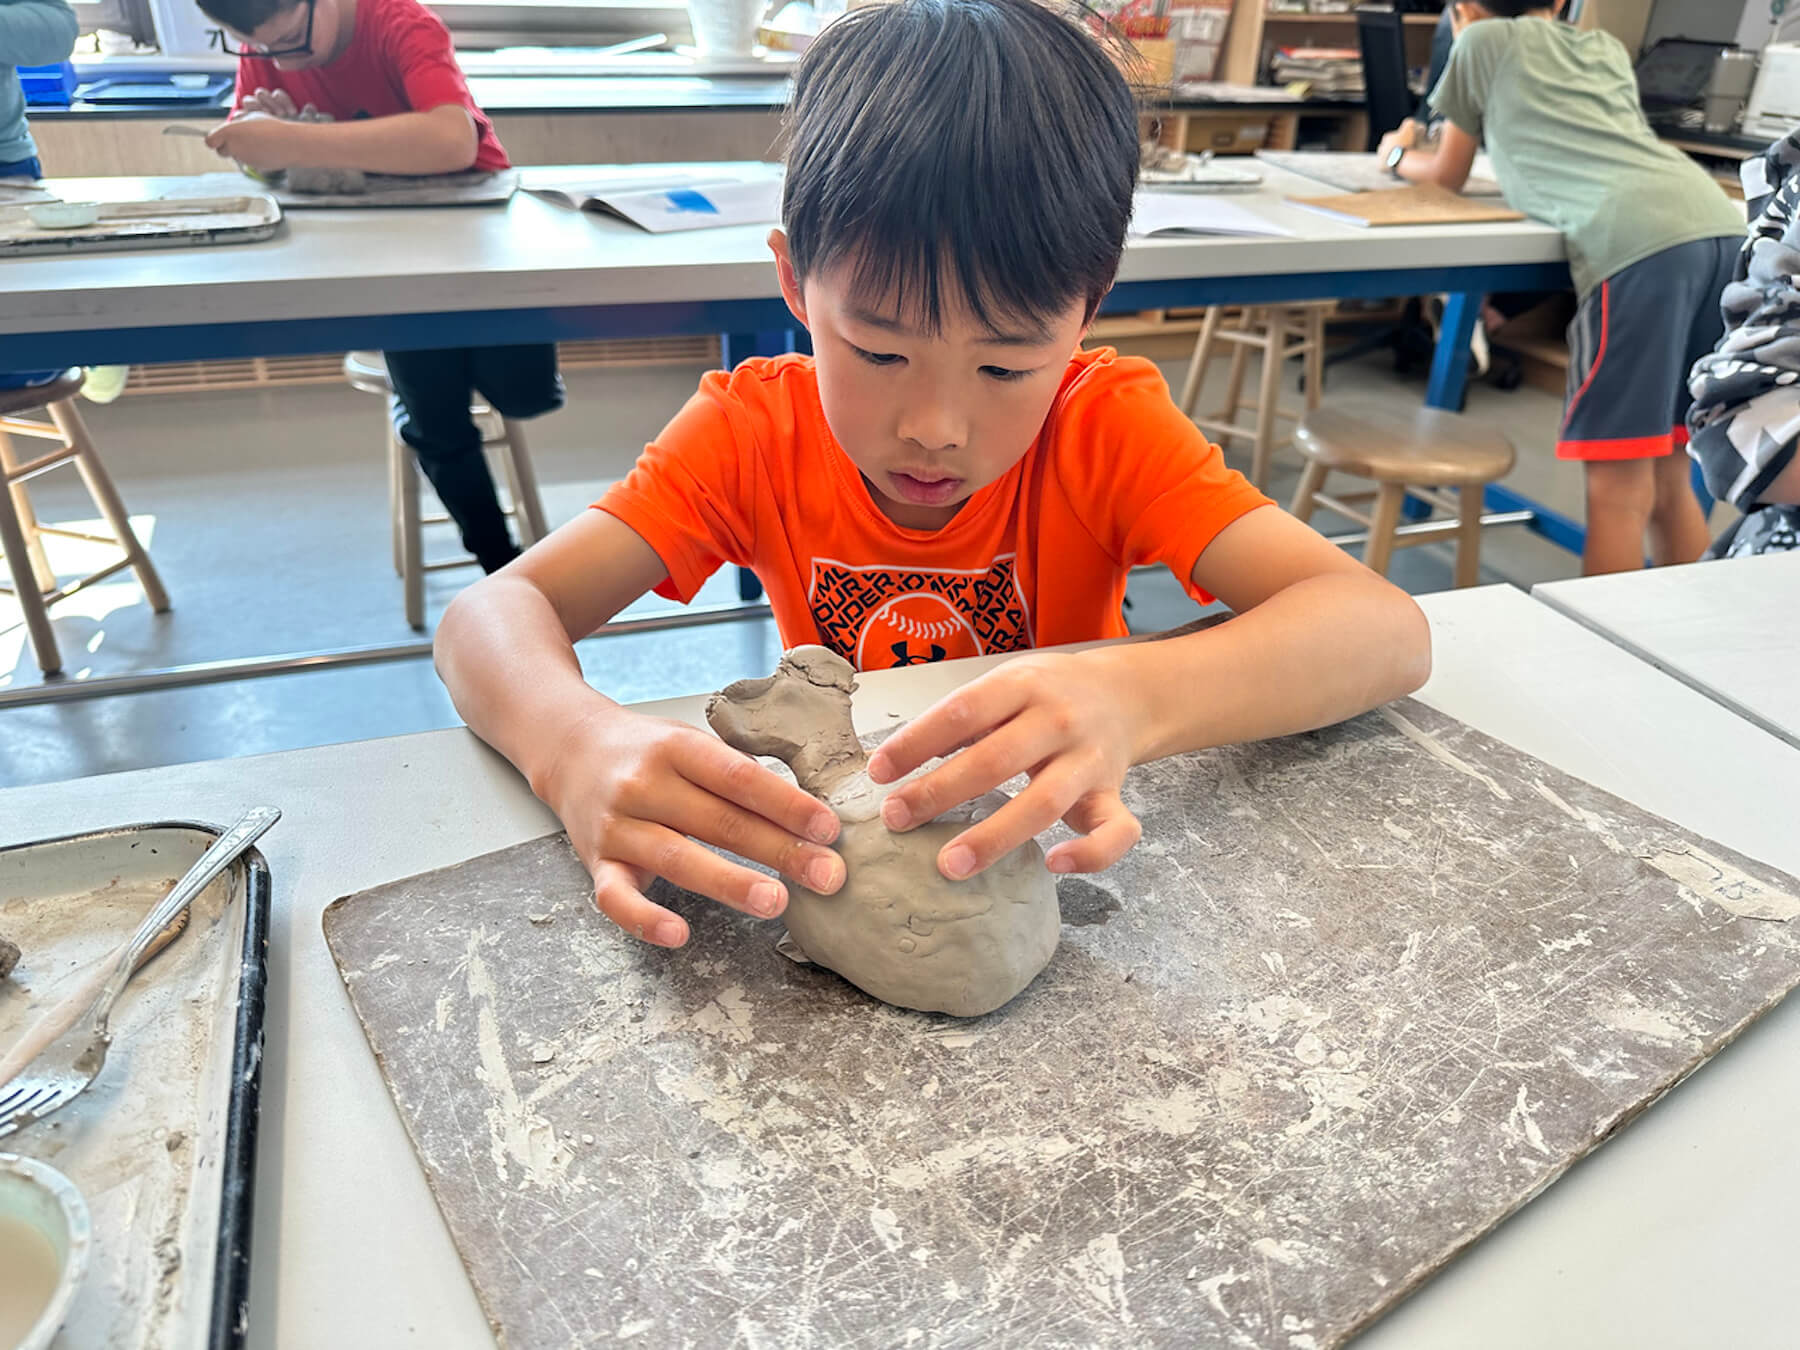 Ethical Culture student diligently works on his ceramics animal mug in the art classroom.